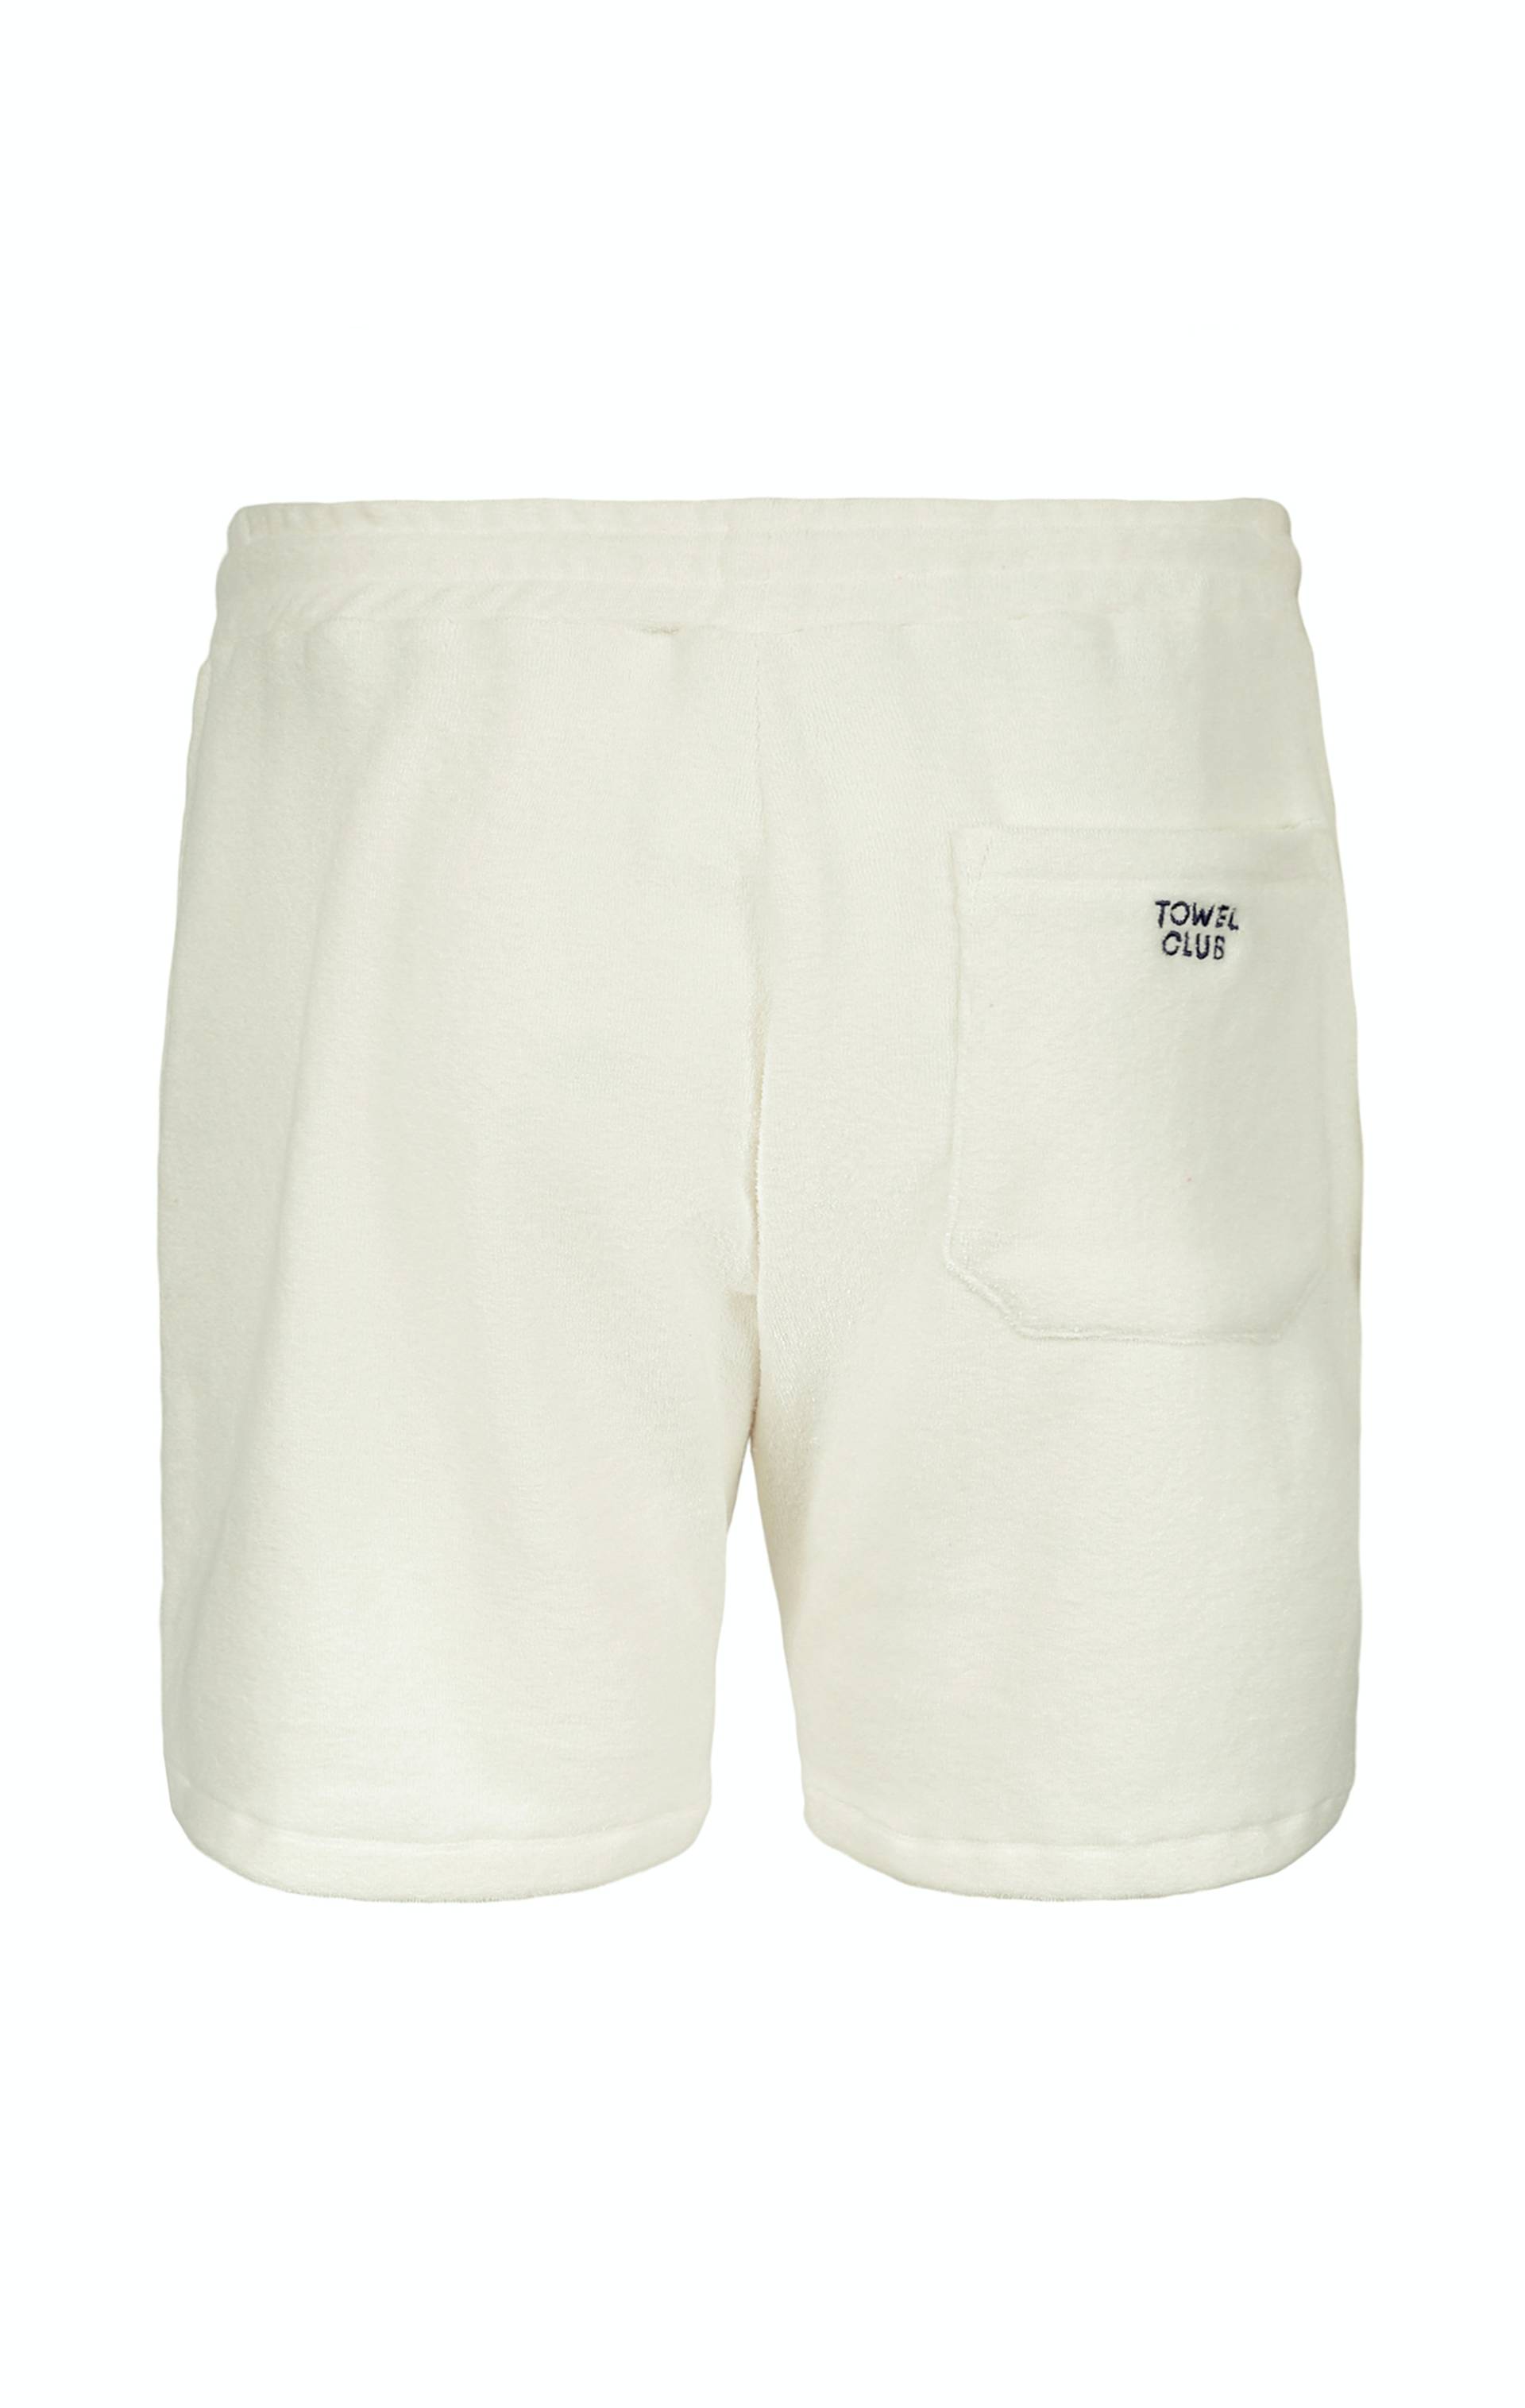 Onepiece Towel Club Shorts White - 9